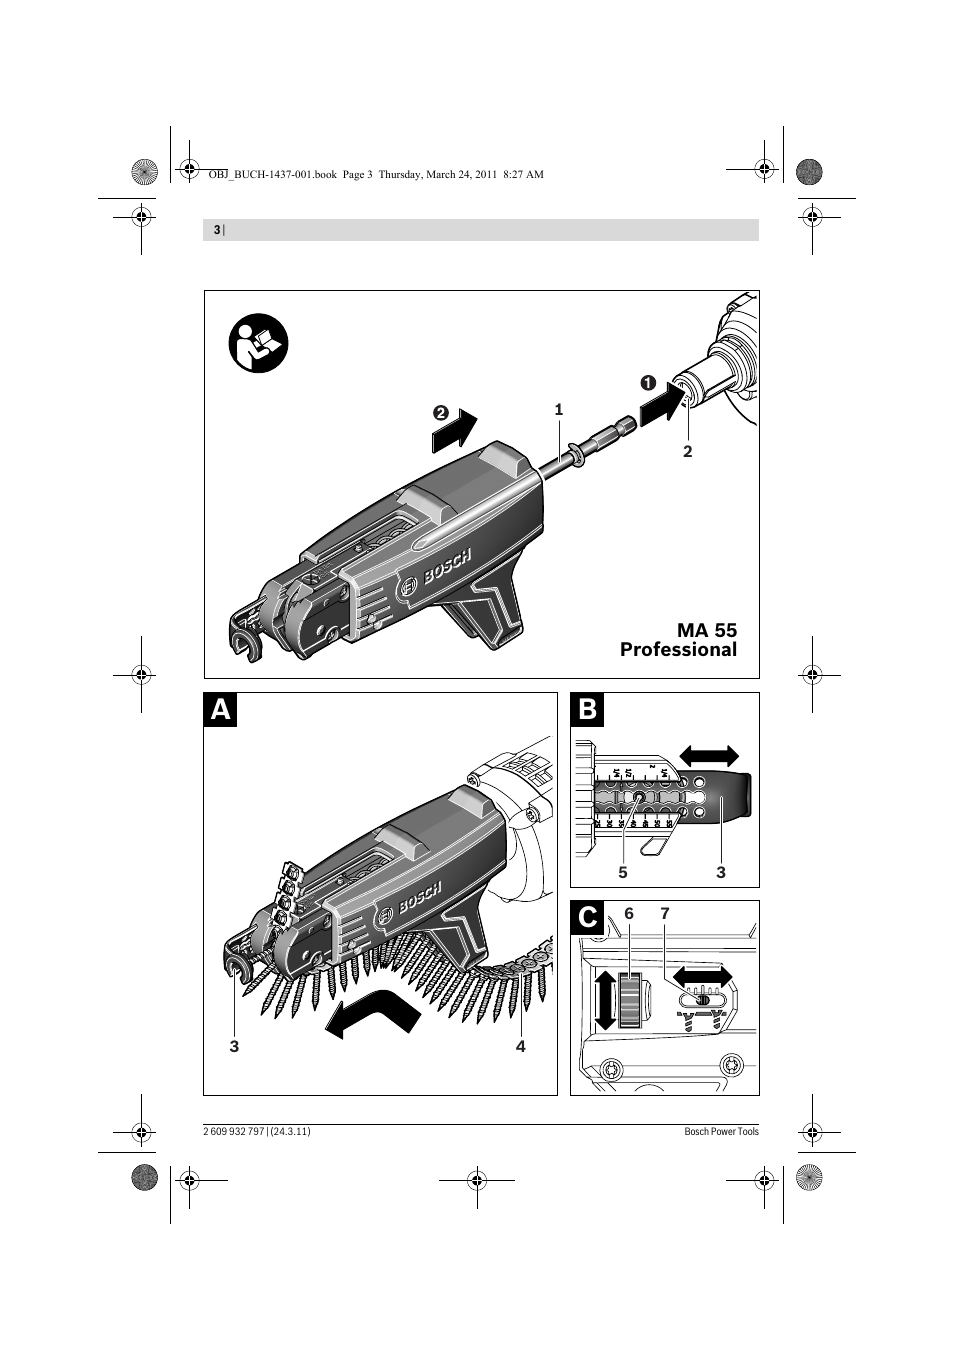 Ab c | Bosch MA 55 Professional User Manual | Page 3 / 53